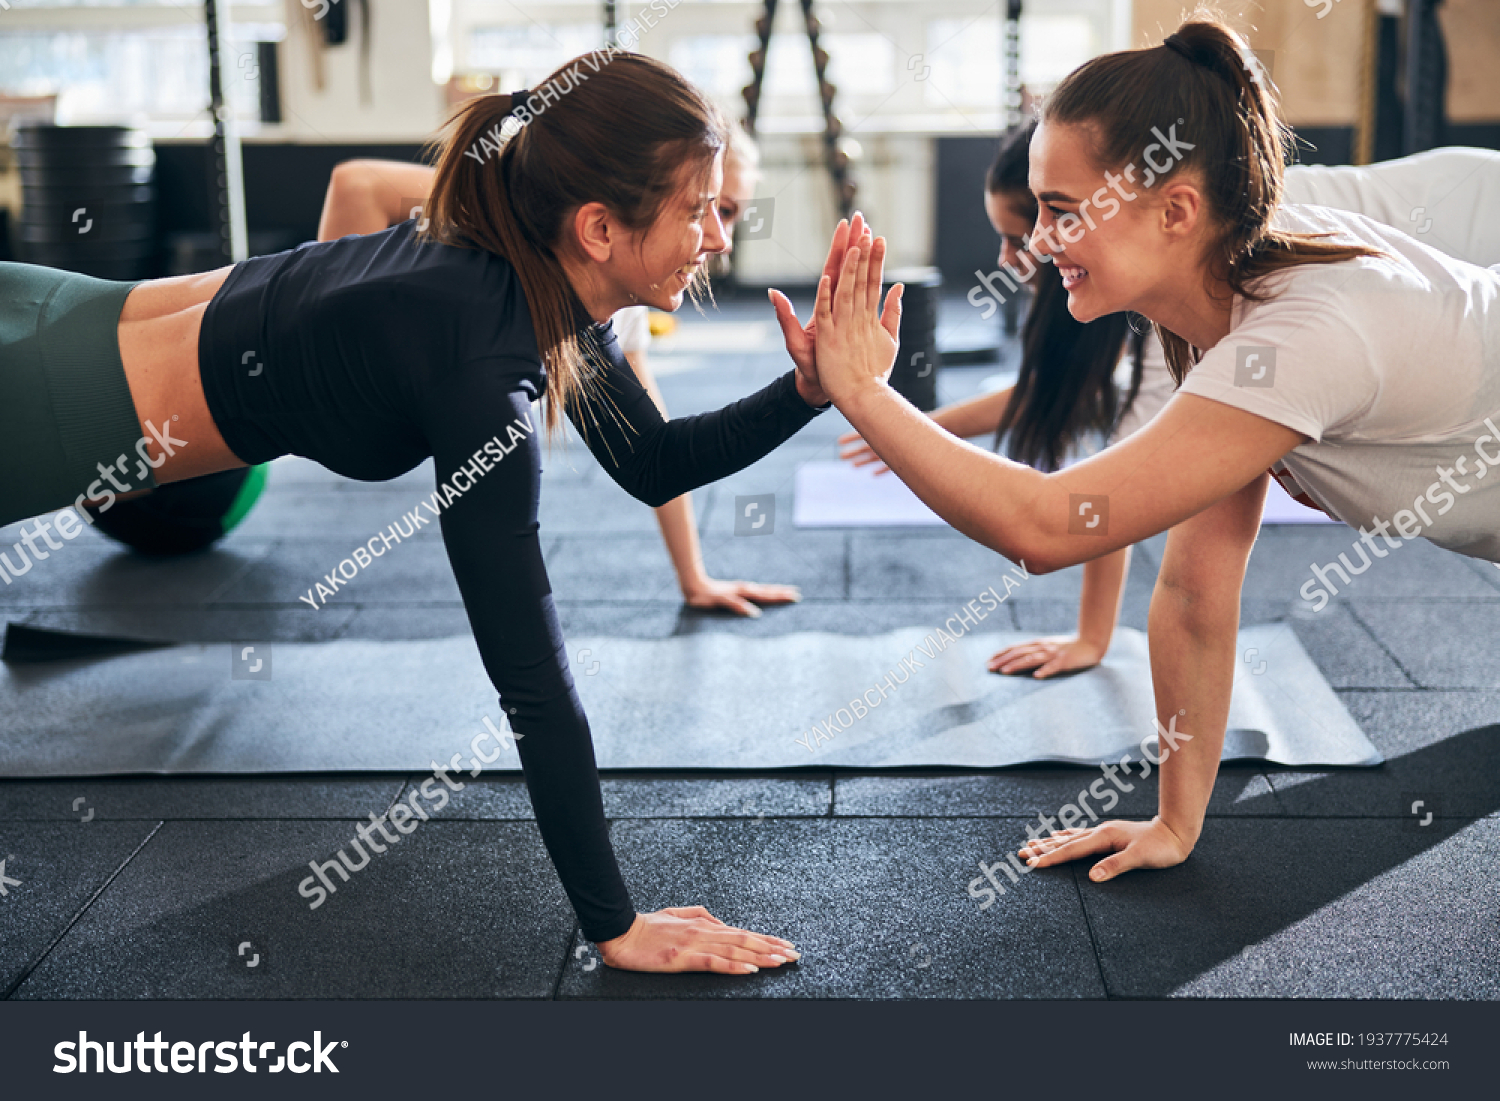 Optimistic young ladies doing plank exercises and high-fiving each other #1937775424